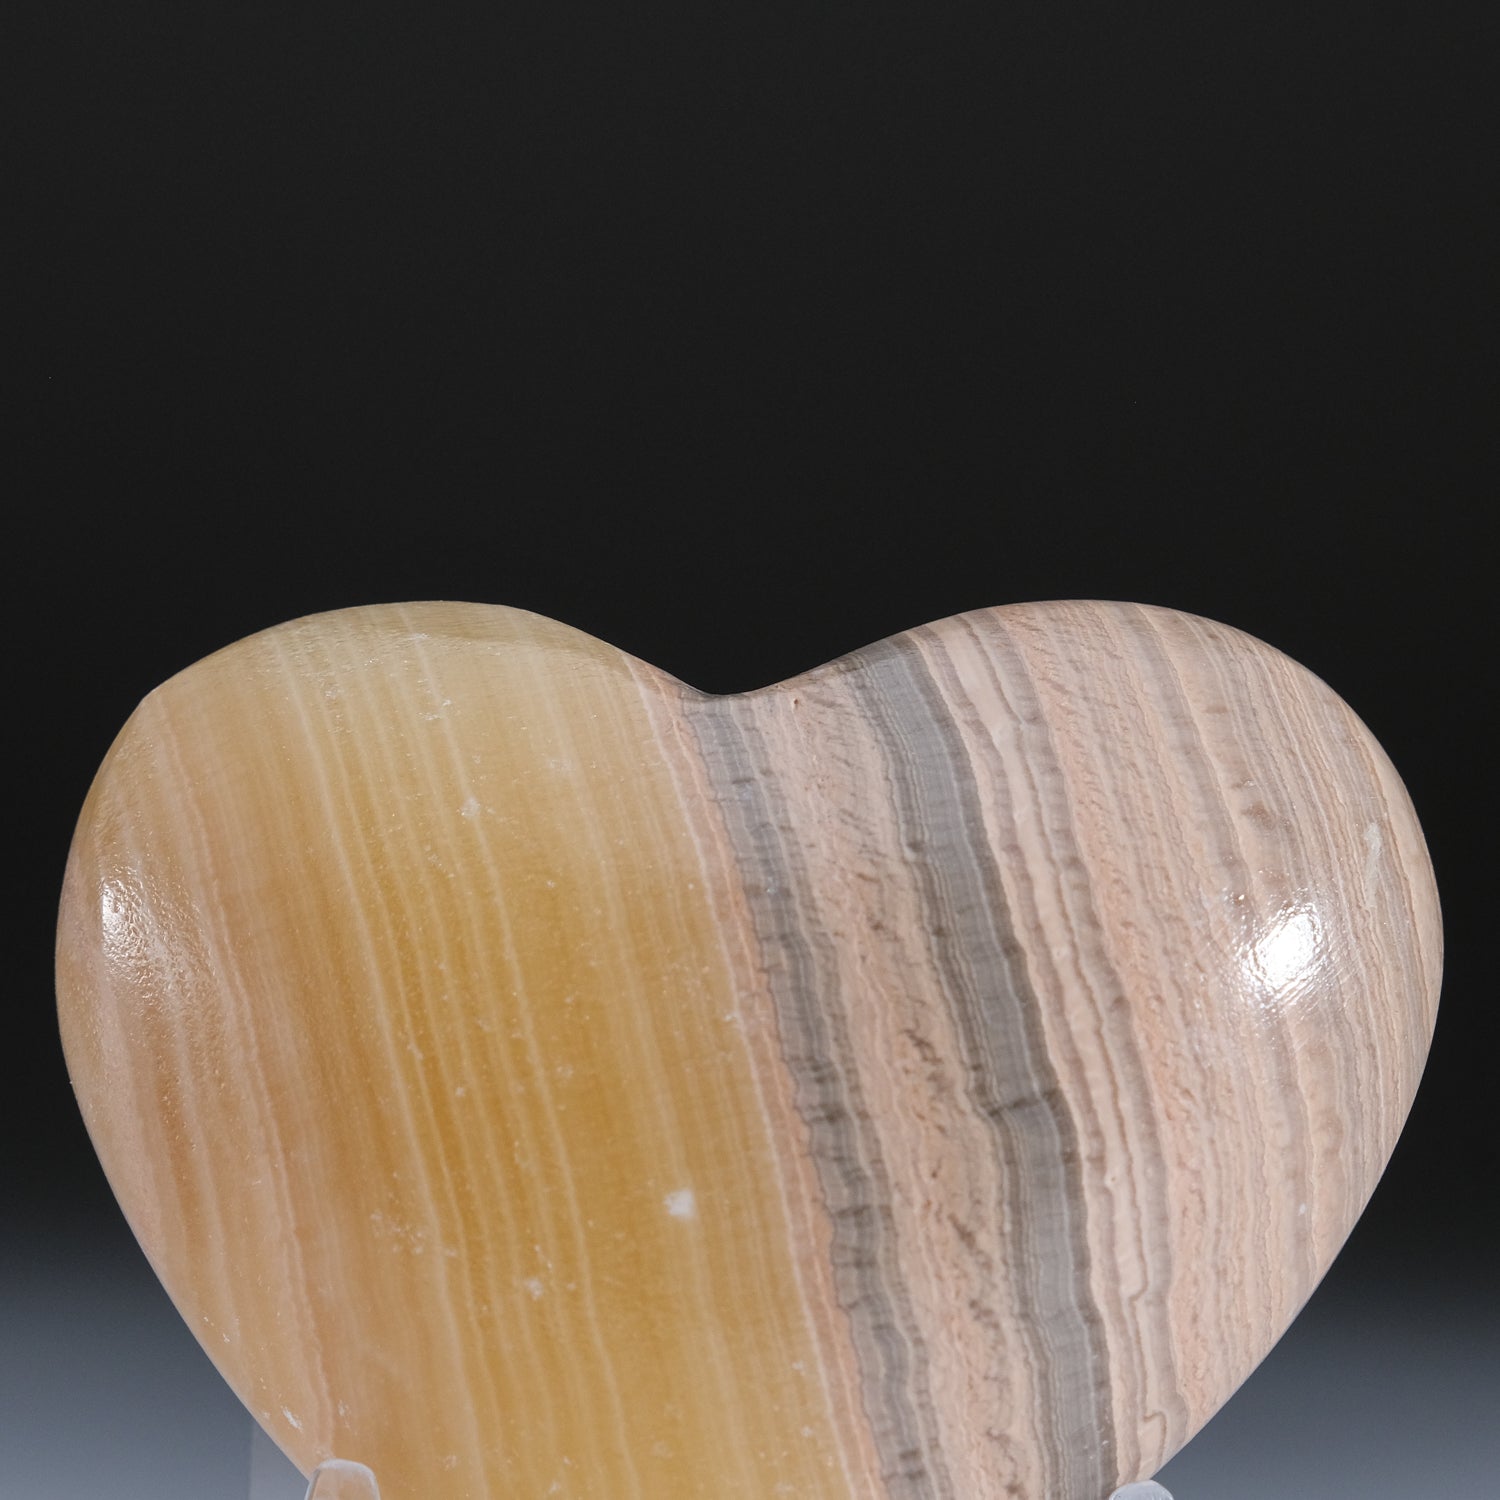 Polished Natural Banded Onyx Heart from Mexico